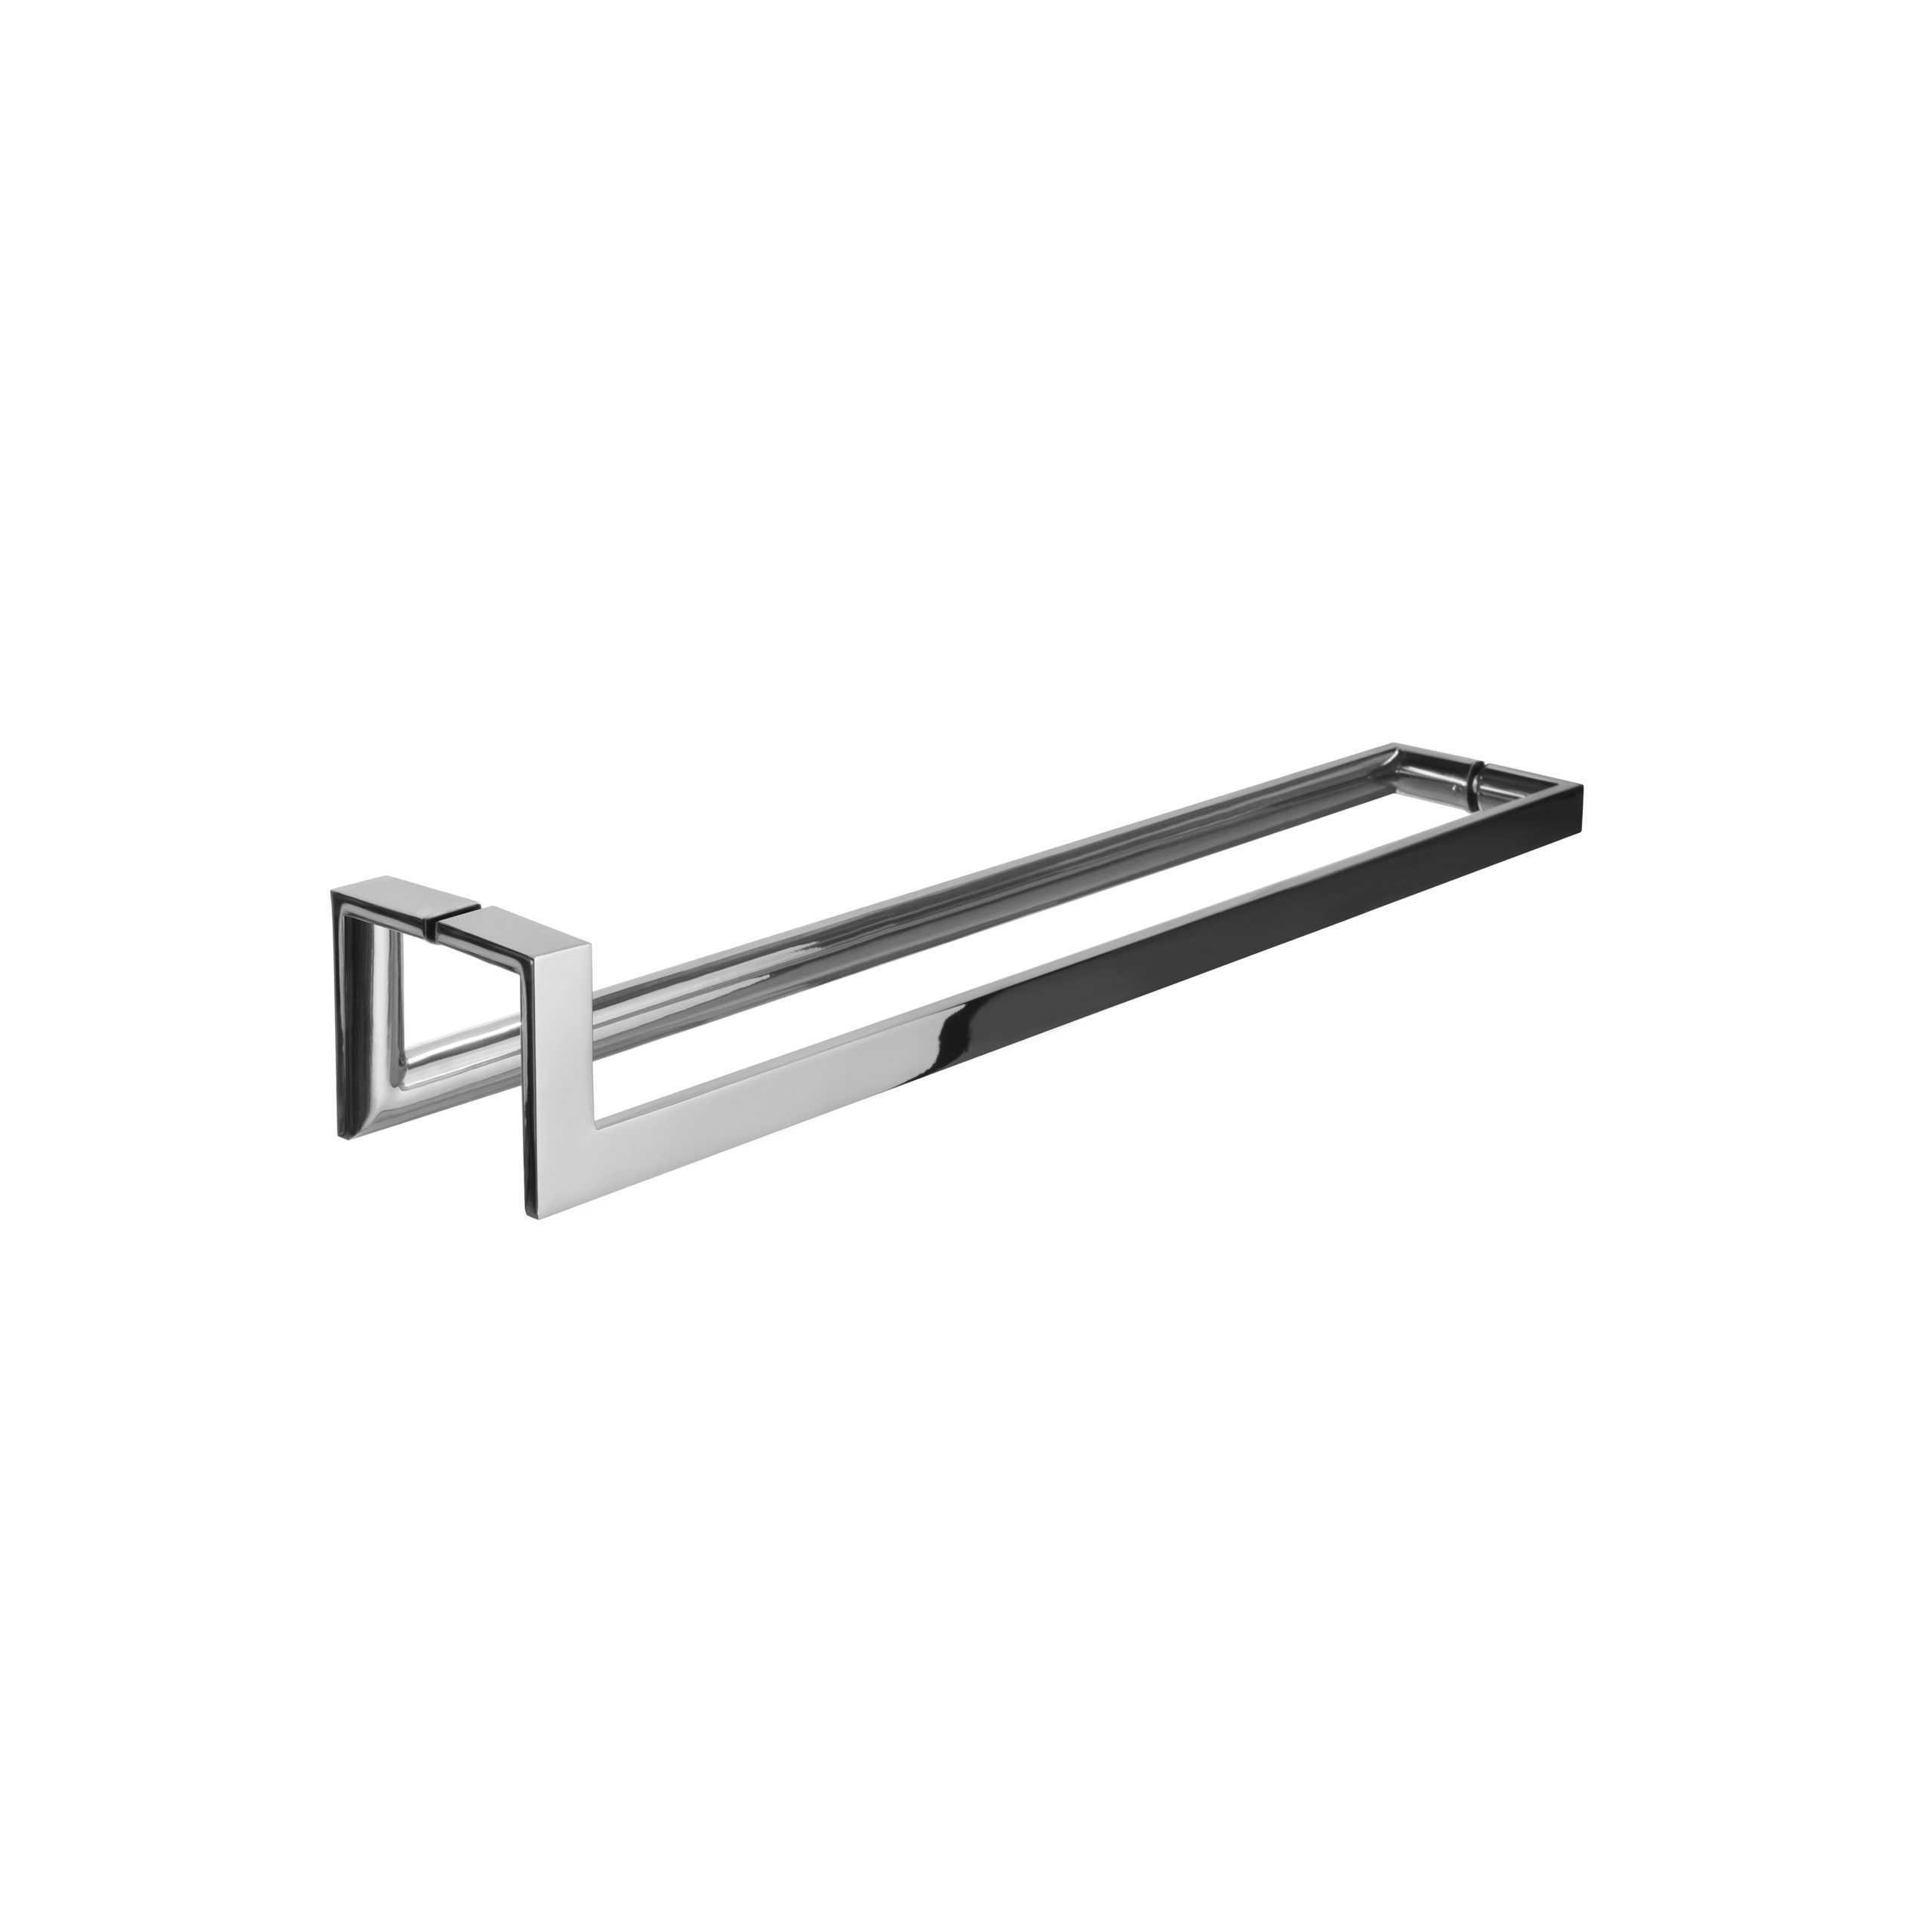 Polished stainless steel modern door handles - towel bar - back to back - product featured image - 24 inch length - product SKU JL 402-3 PSS